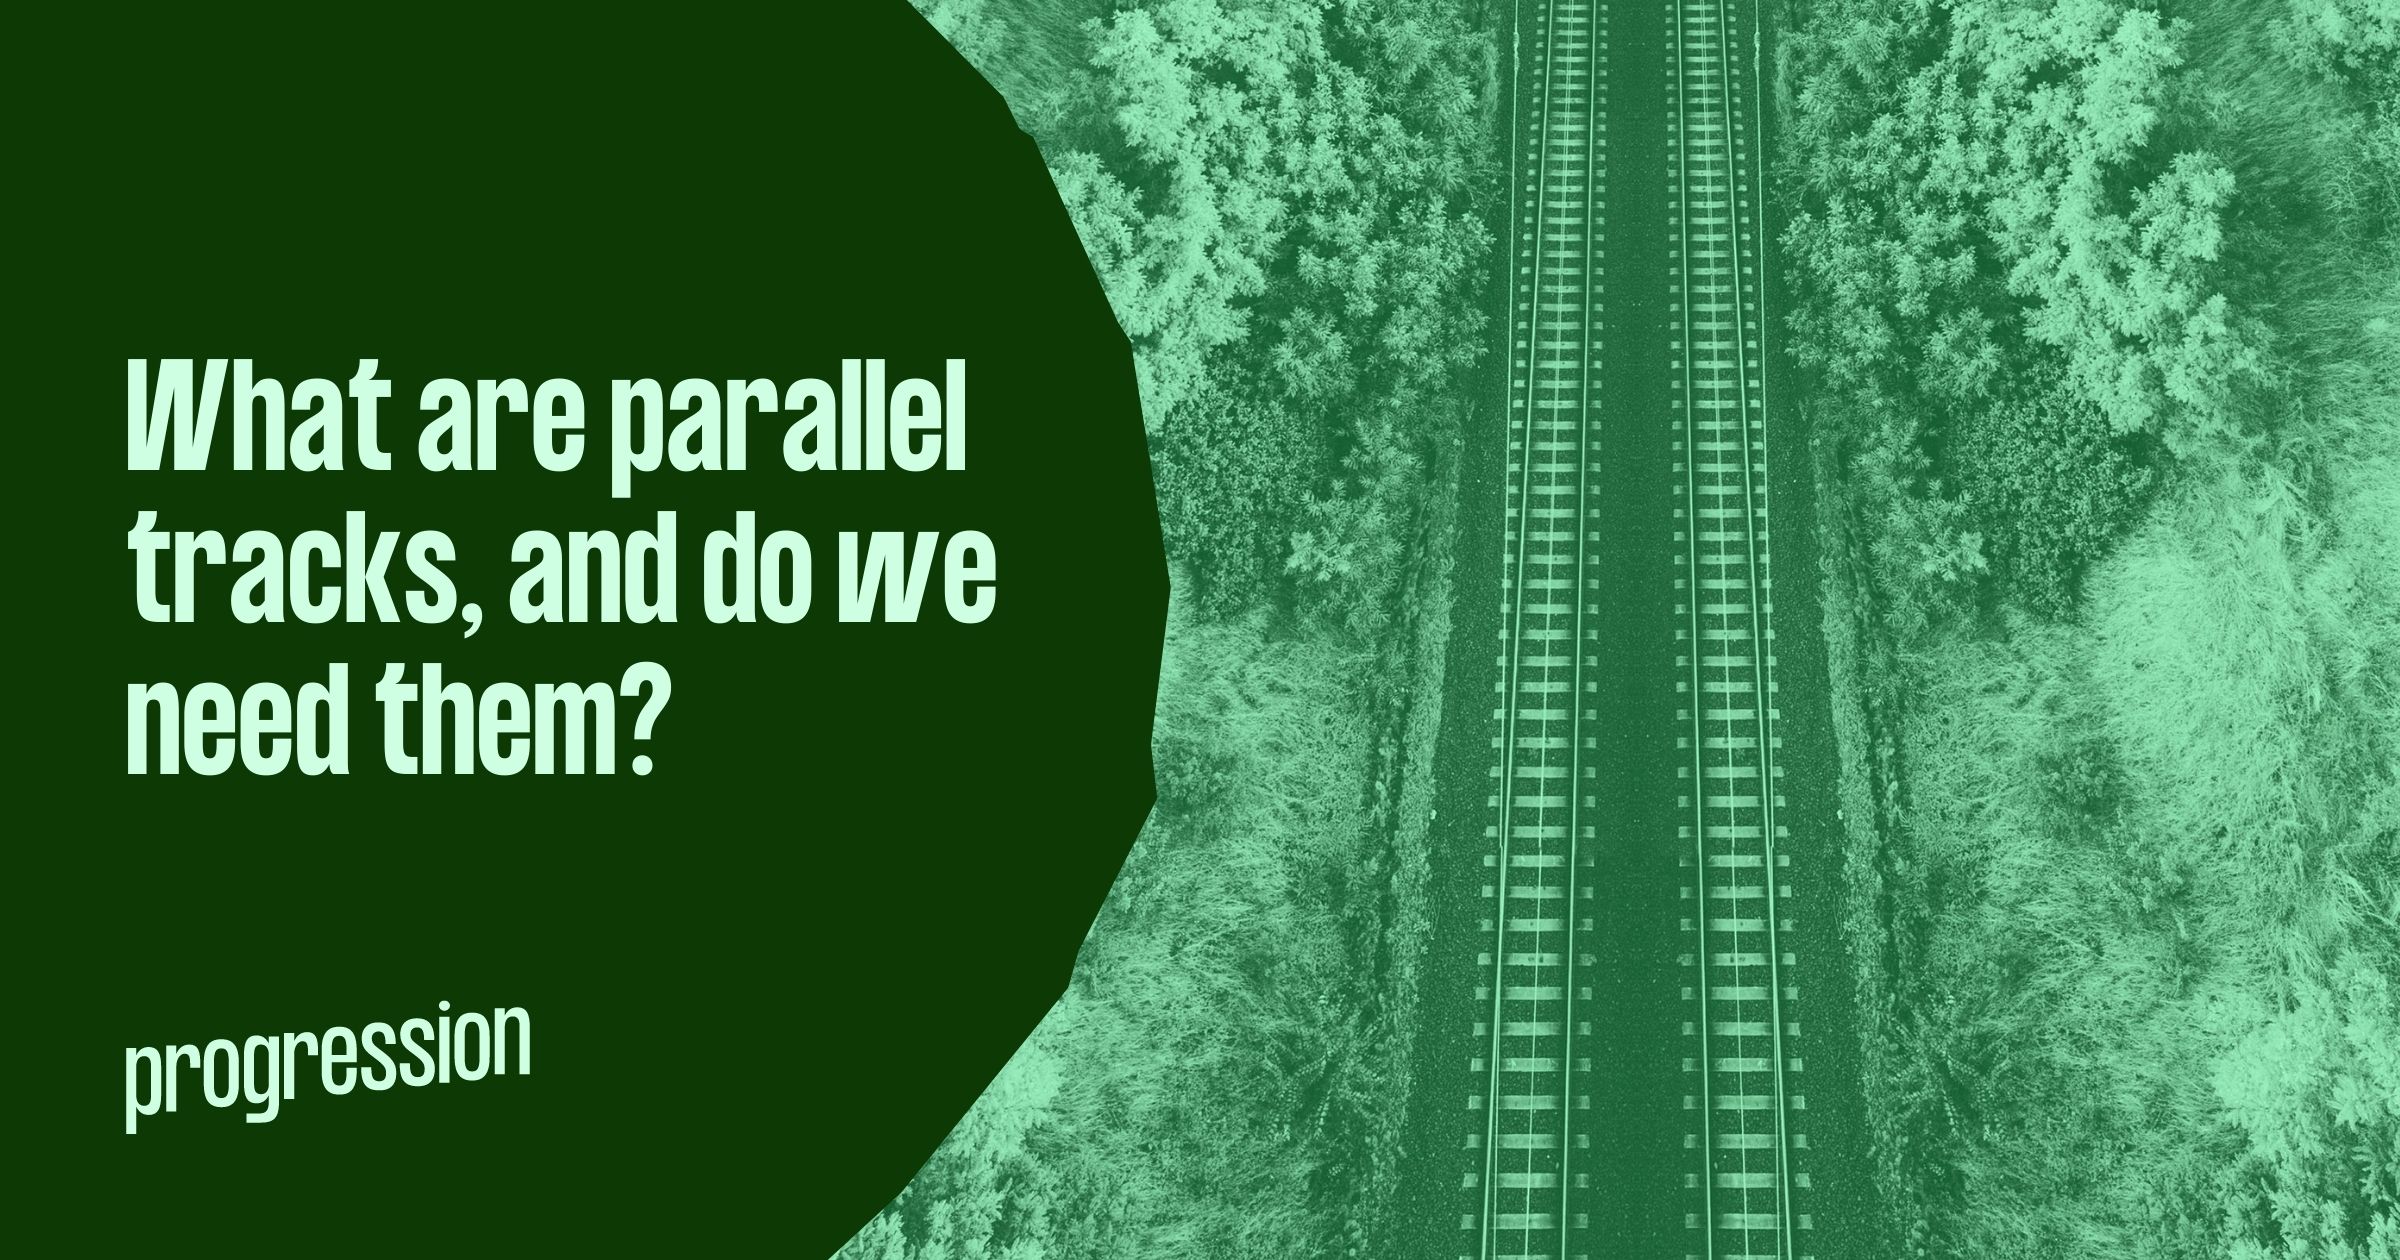 What are parallel tracks, and do we need them?